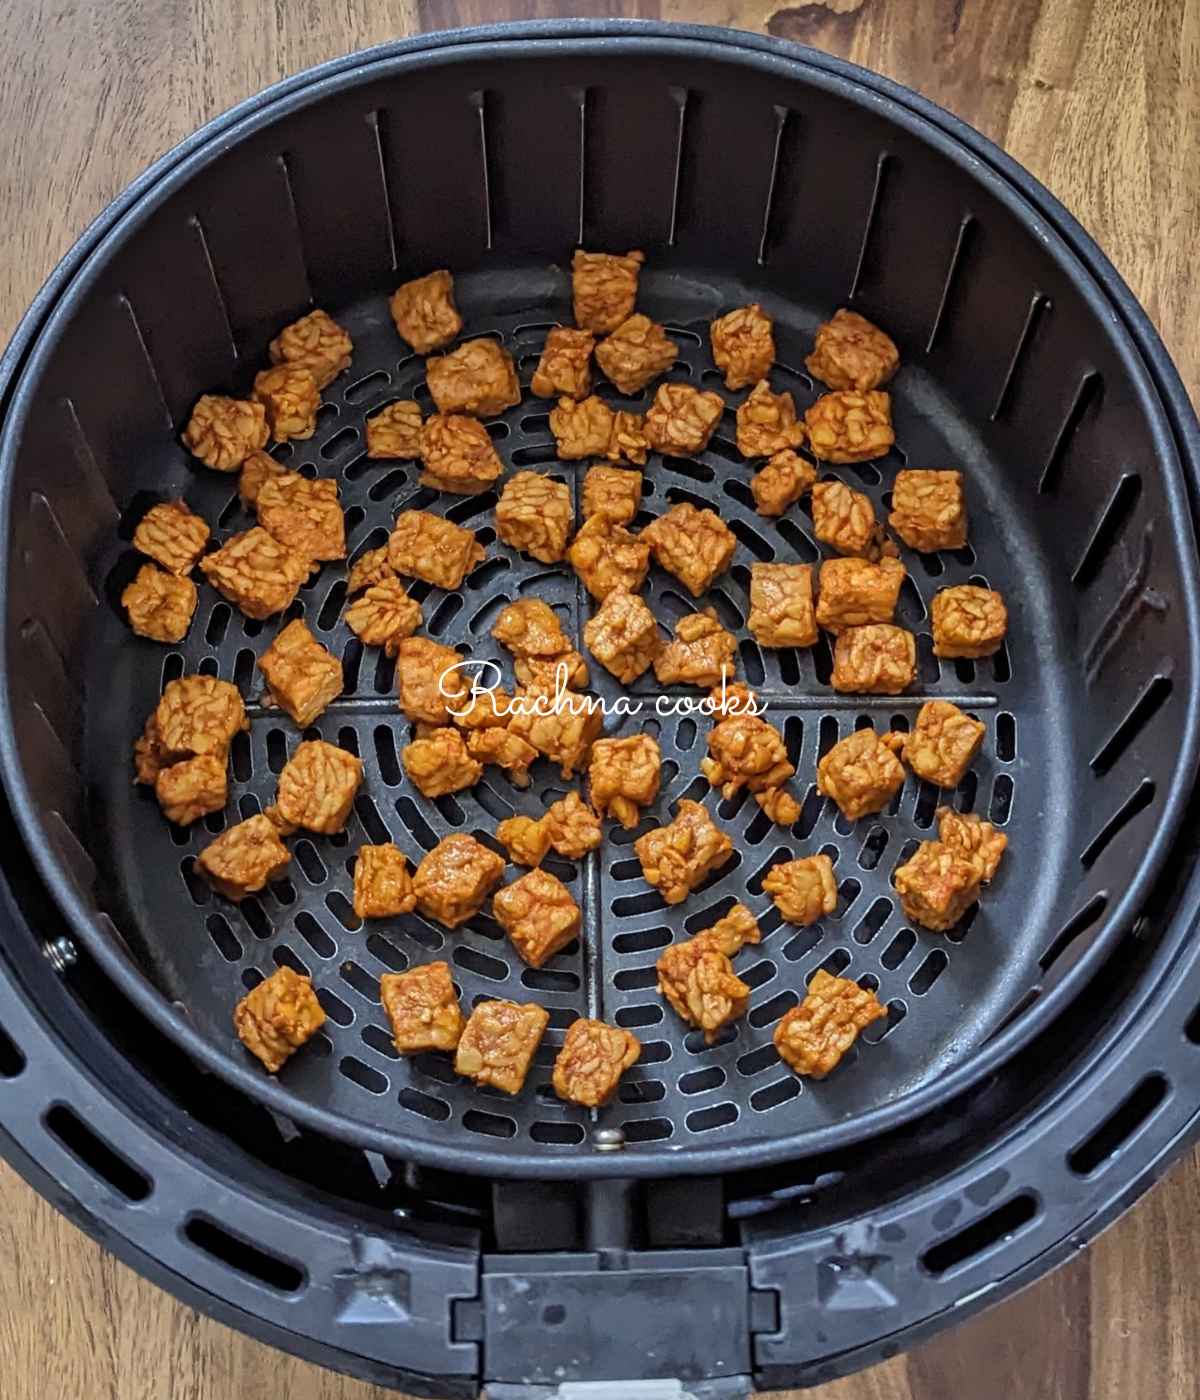 Marinated tempeh cubes laid out in air fryer basket ready for air frying.